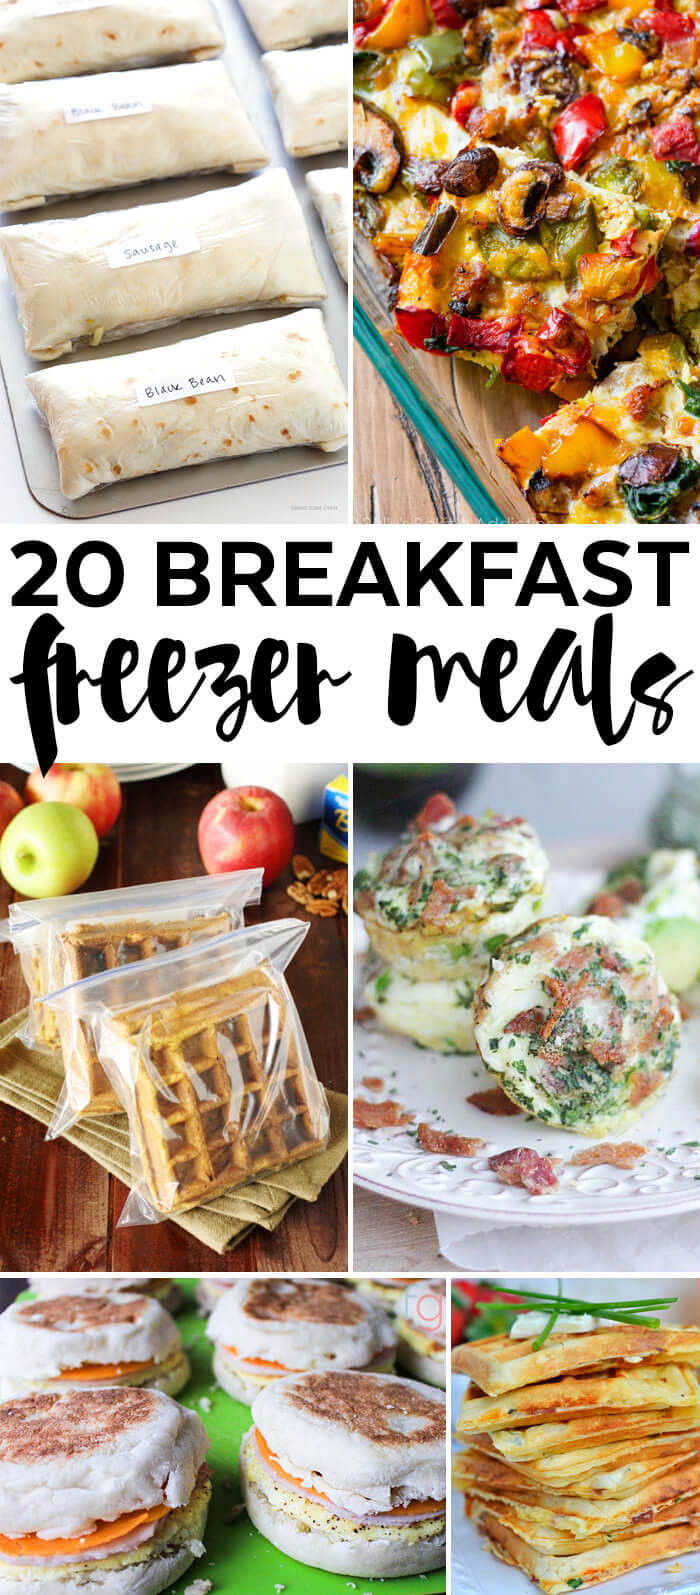 Make Ahead Breakfast Recipes To Freeze
 20 Freezer Meals to Stock your Freezer with Breakfasts